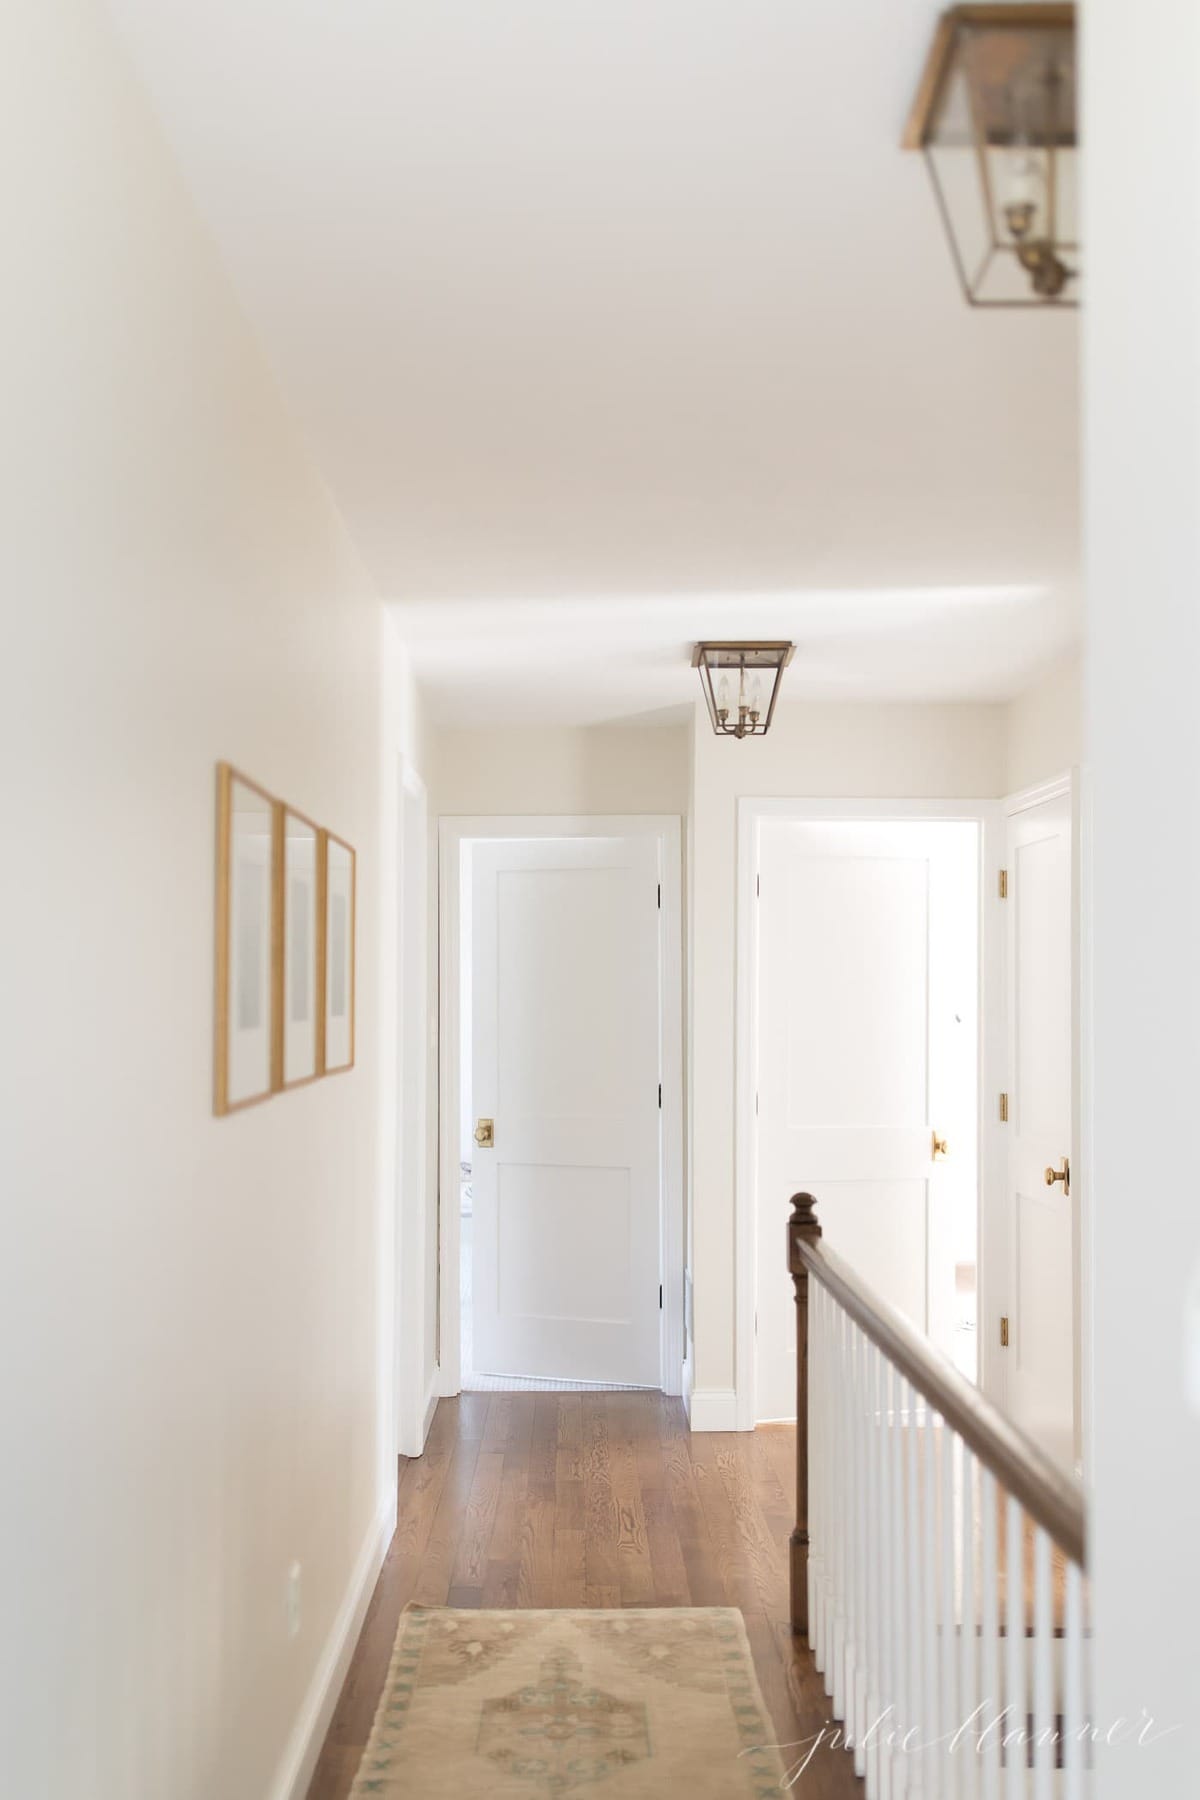 hallway painted in a cream color with white shaker doors